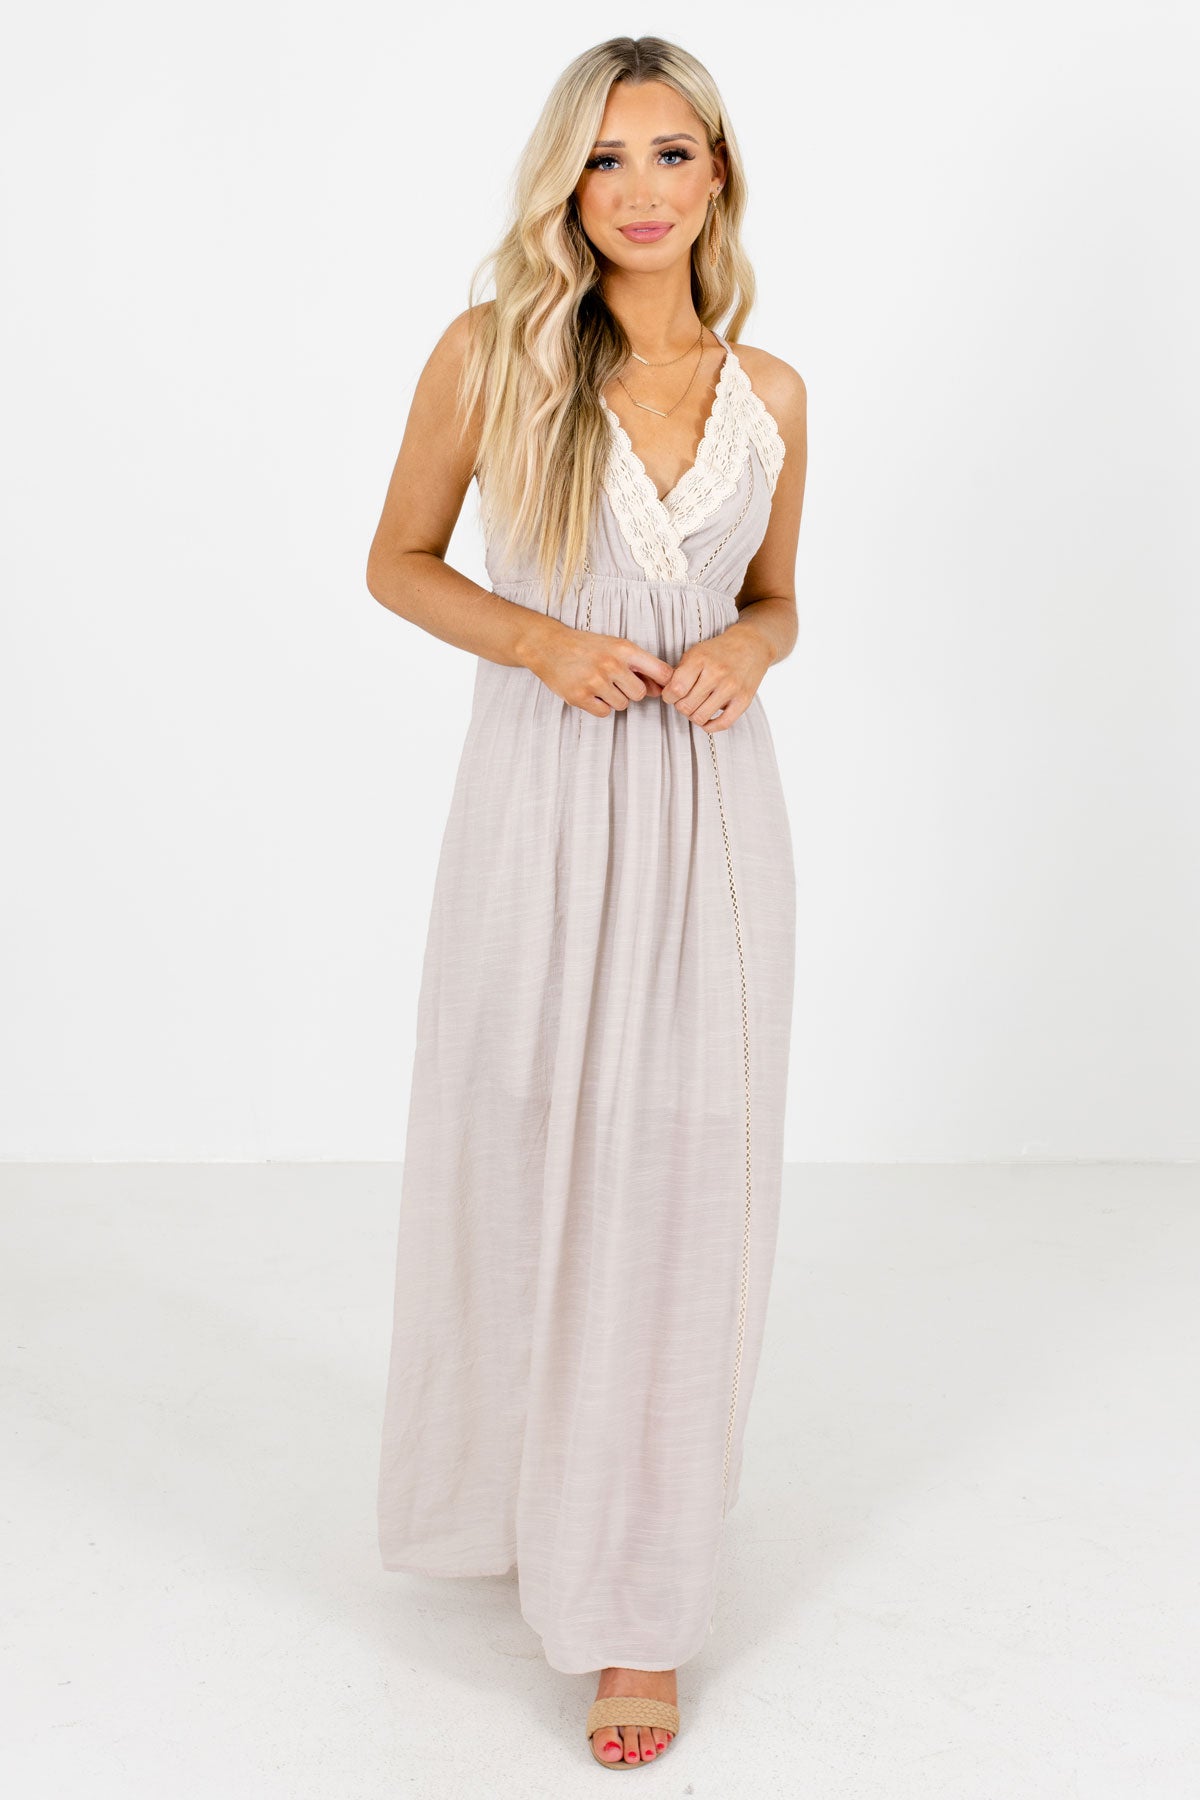 Women's Taupe Spring and Summertime Boutique Clothing